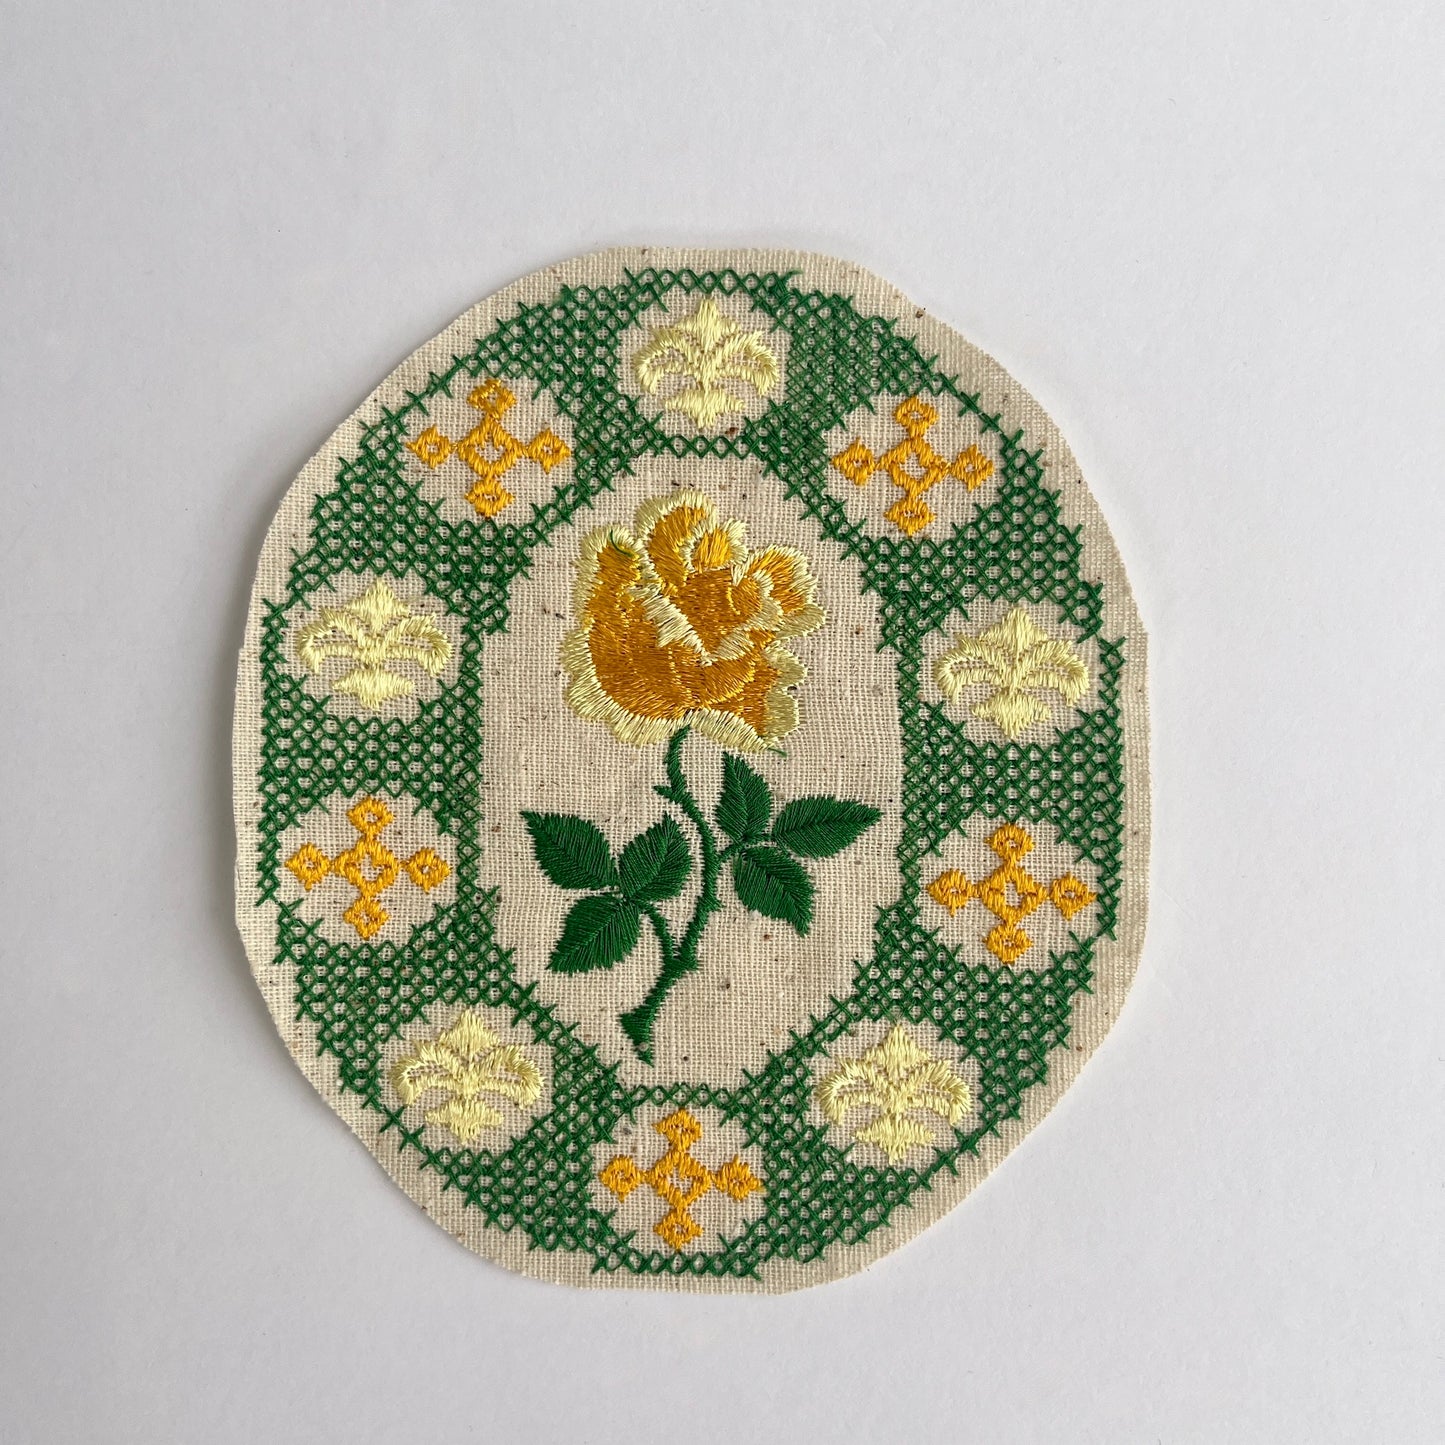 Lovely vintage embroidered floral yellow rose patches, in a choice of 4 colours, on a natural colour cotton base. Can be sewn directly to embellish or repair garments, they would make fab elbow patches!